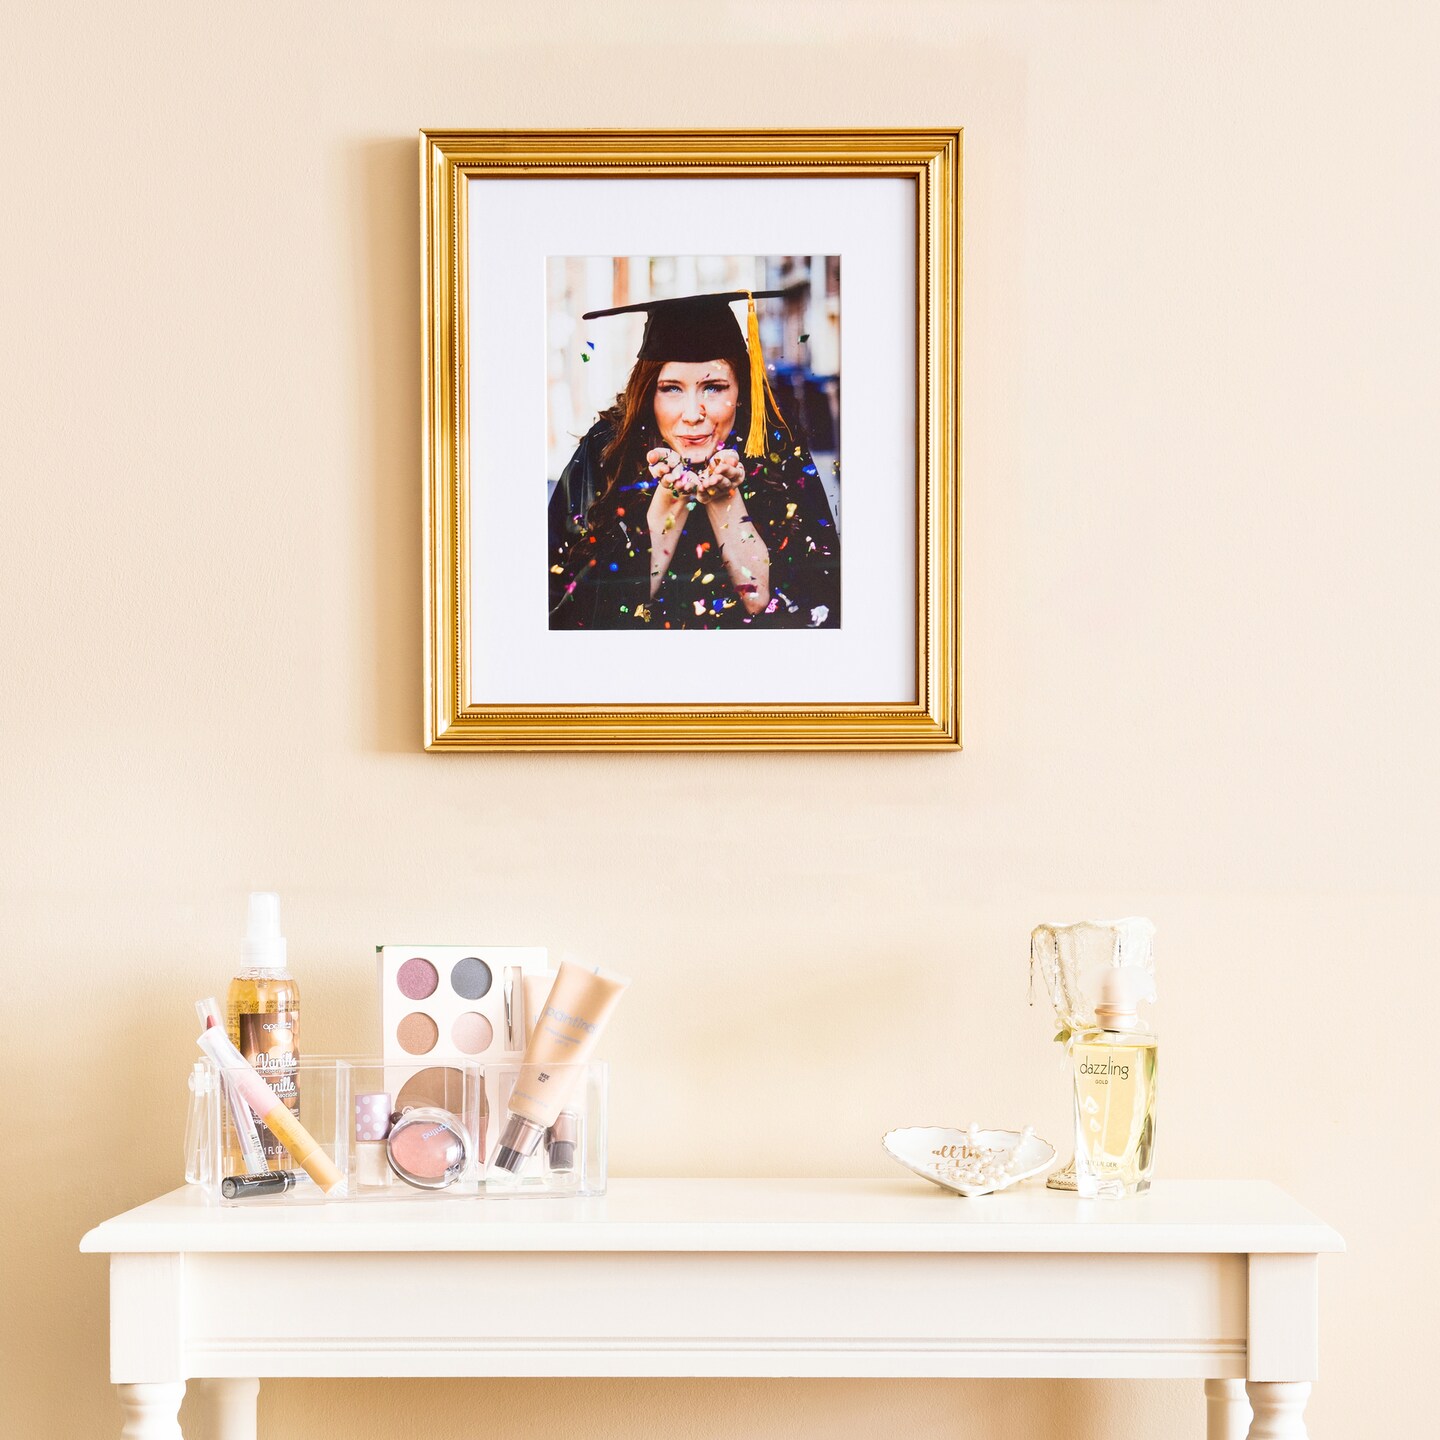 ArtToFrames 16x20 Inch Picture Frame, This 1.25 Inch Custom Wood Poster Frame is Available in Multiple Colors, Great for Your Art or Photos - Comes with Regular Acrylic and  Foam Backing 3/16 inch (V-81375-16x20)